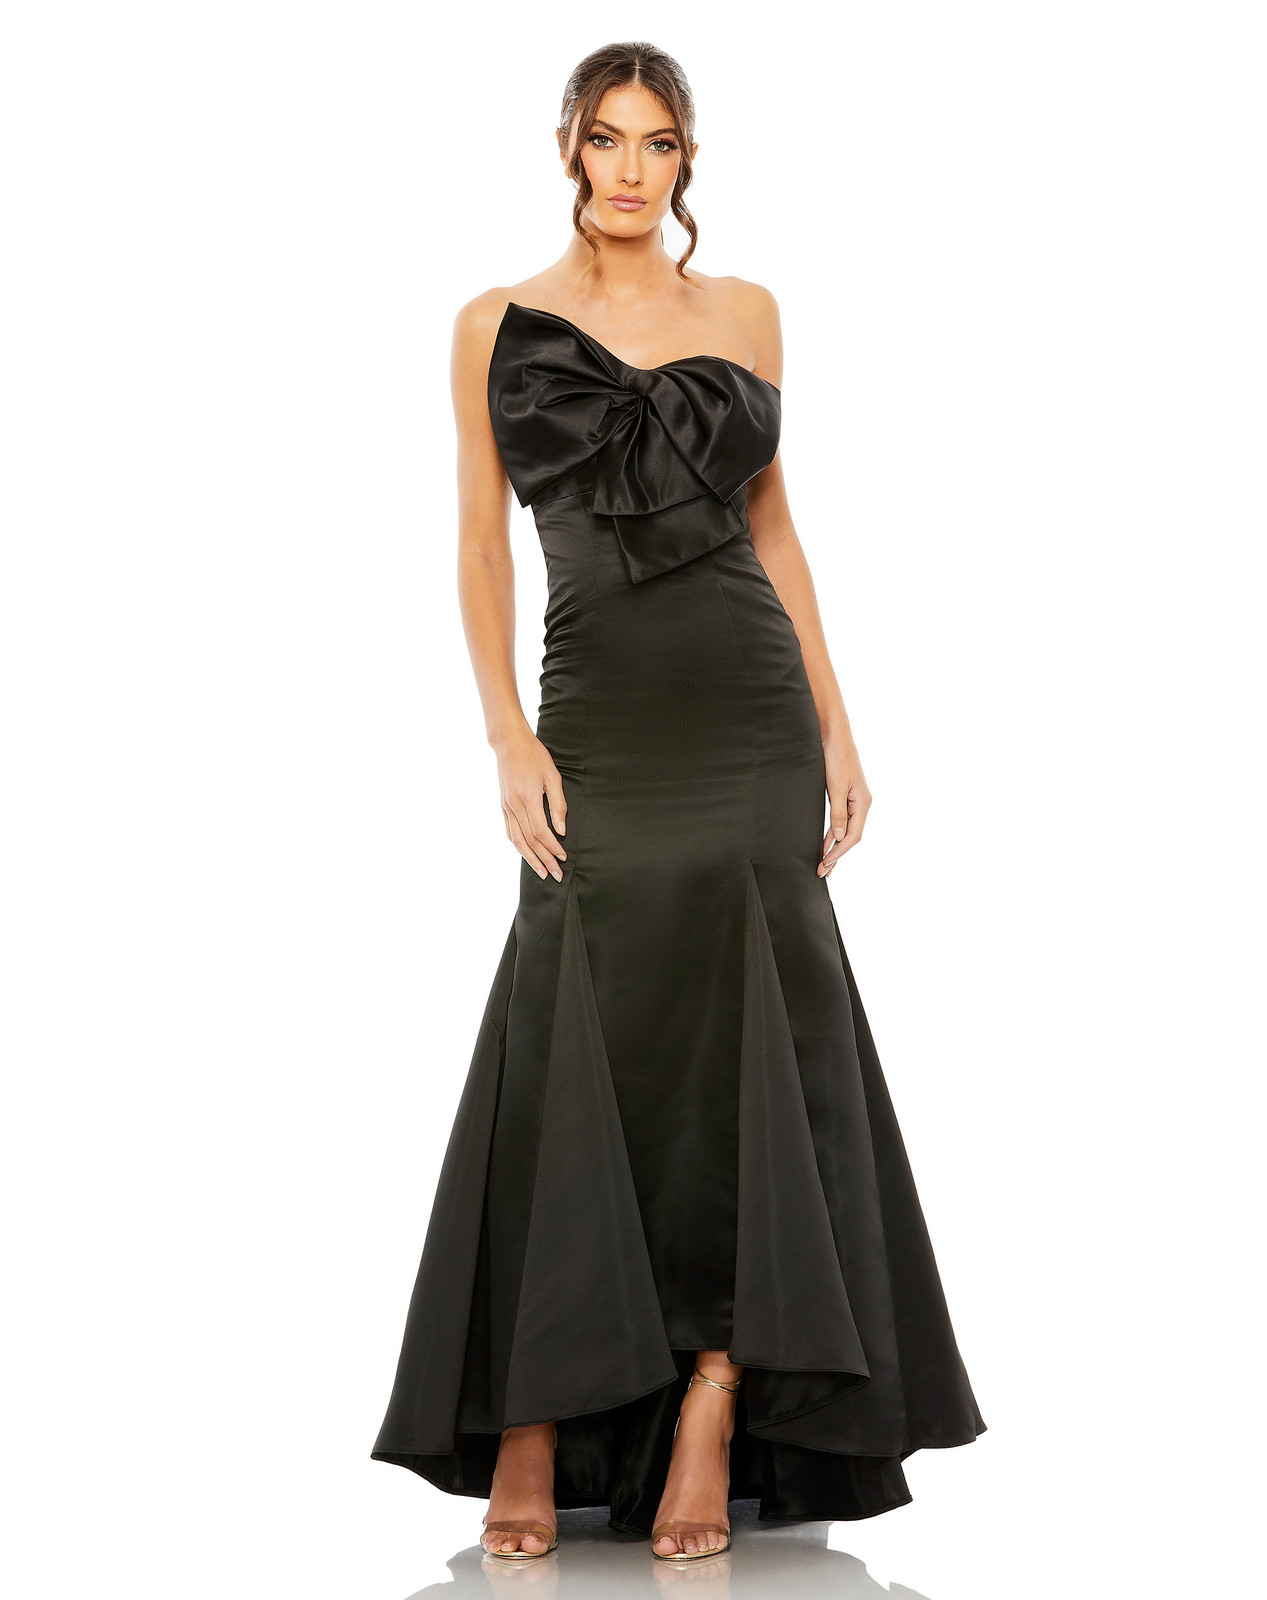 Primary image for MAC DUGGAL 49701. Authentic dress. NWT. Fastest shipping. Best retailer price !